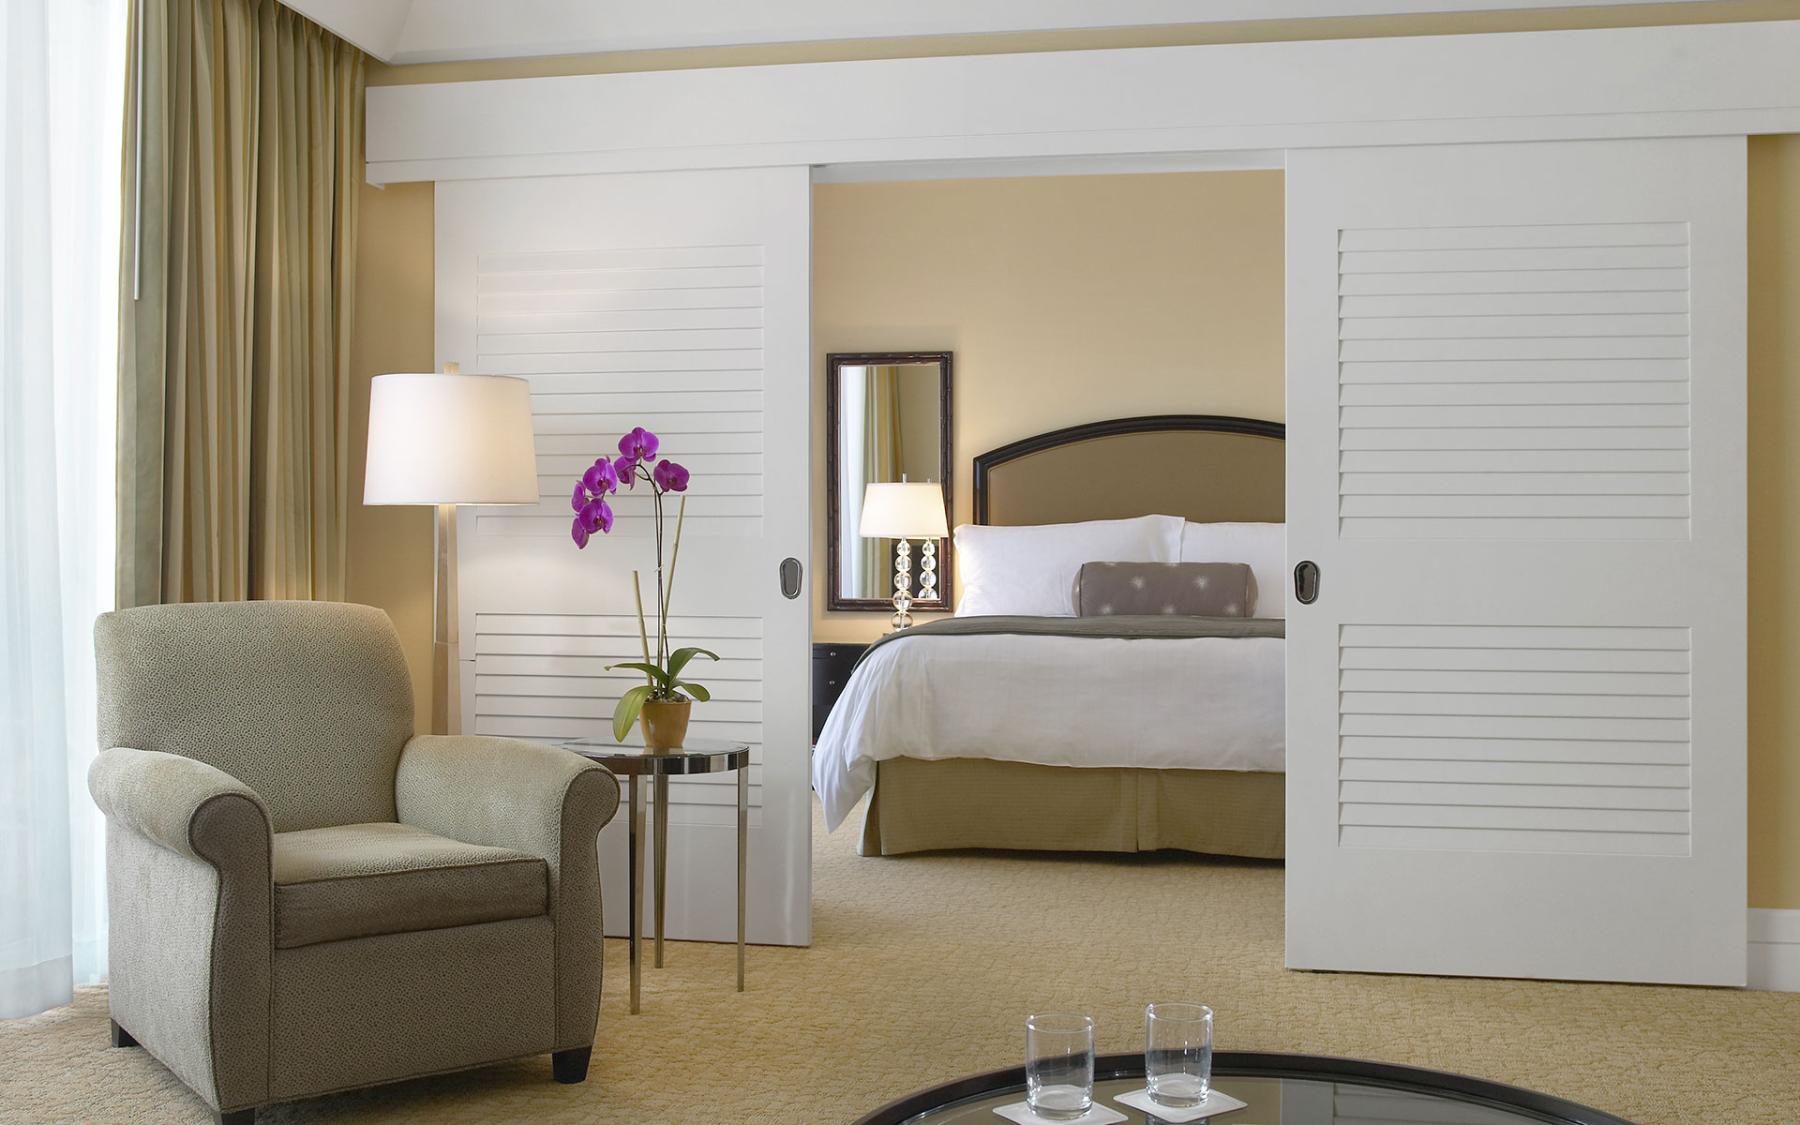 Sliding louver barn doors from the Beverly Hilton